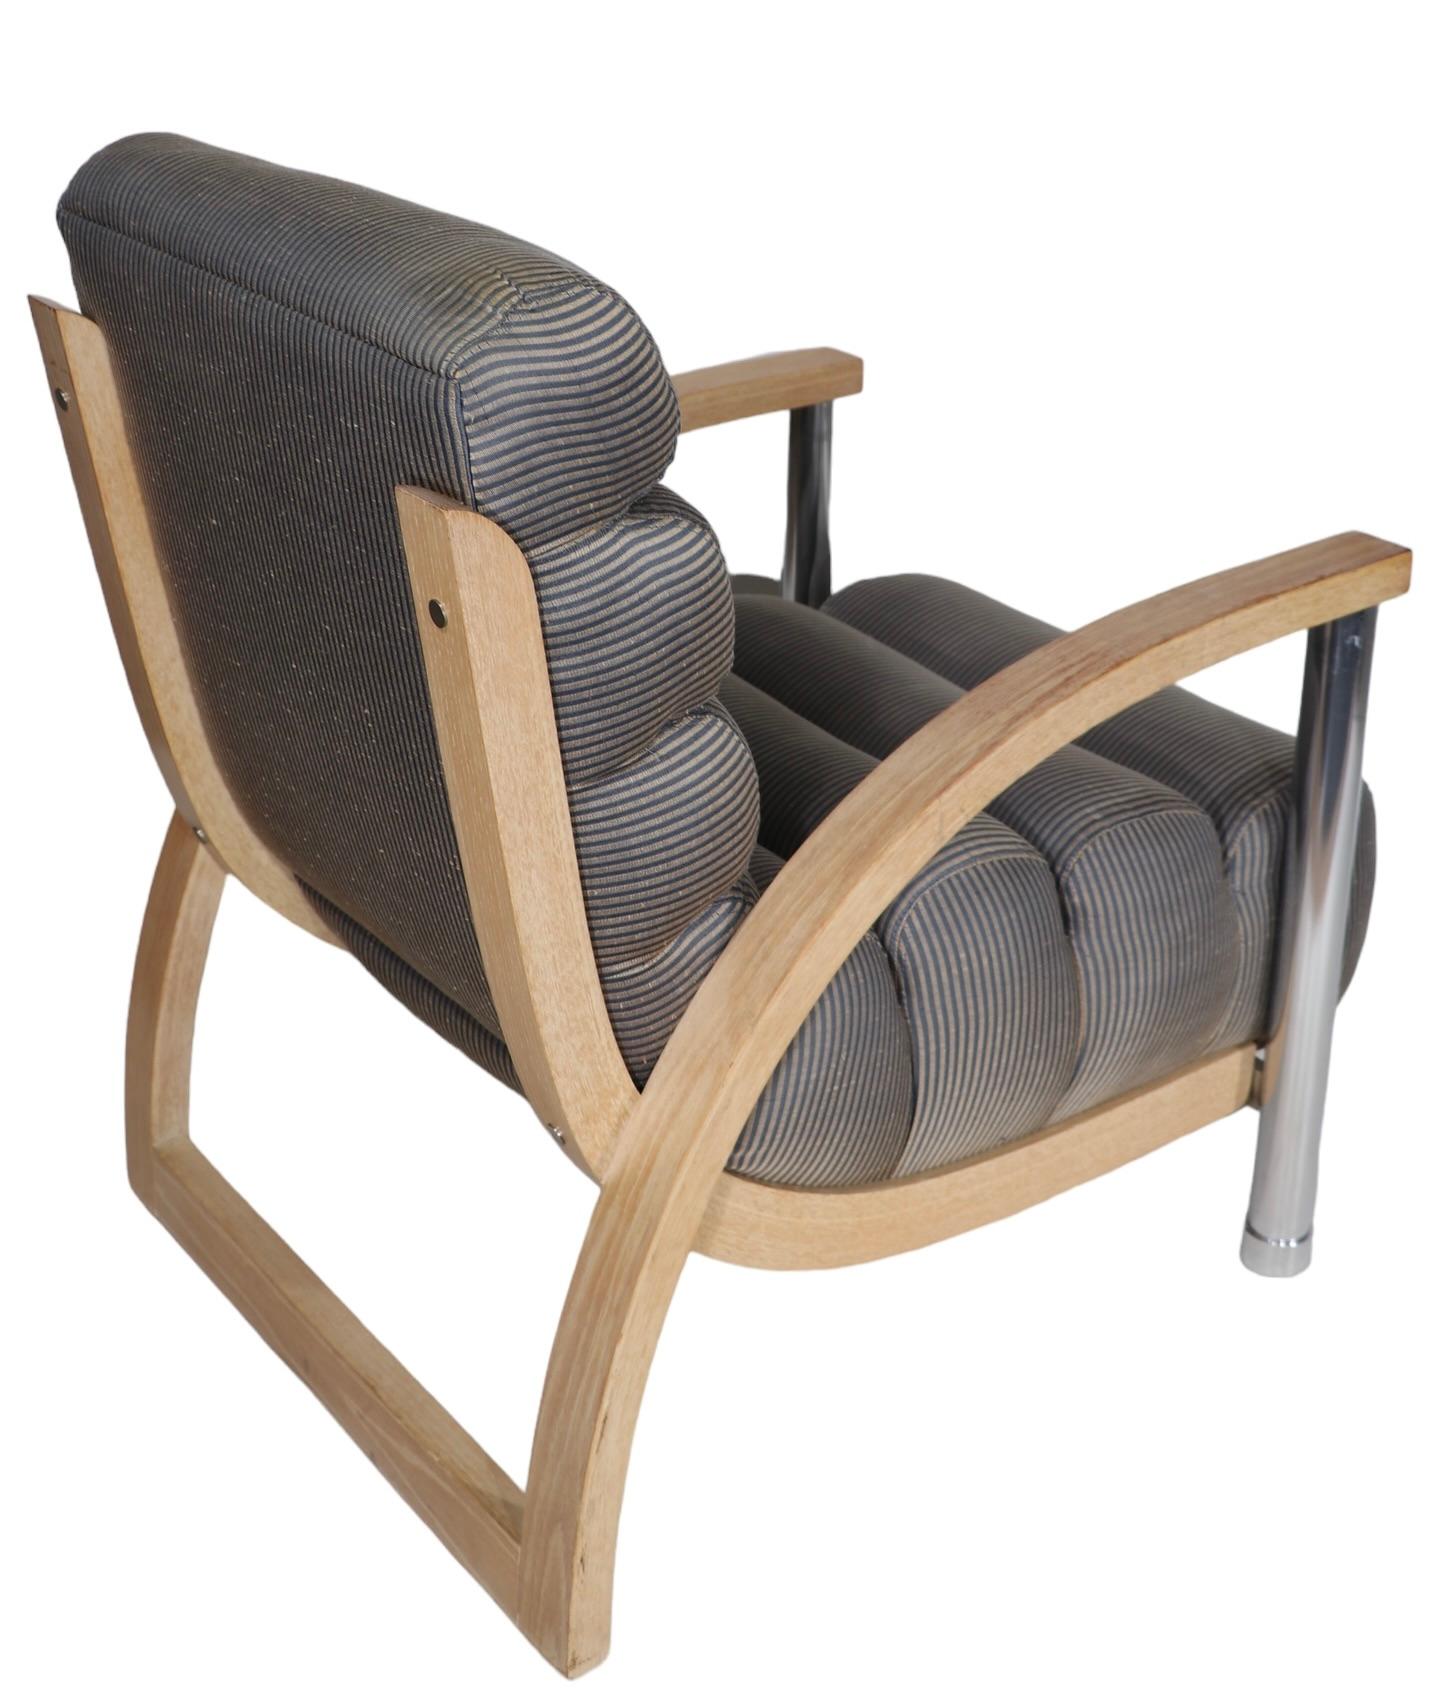 Post Modern Eclipse Lounge Chair by Jay Specter for Century Furniture c 1970/80s For Sale 1